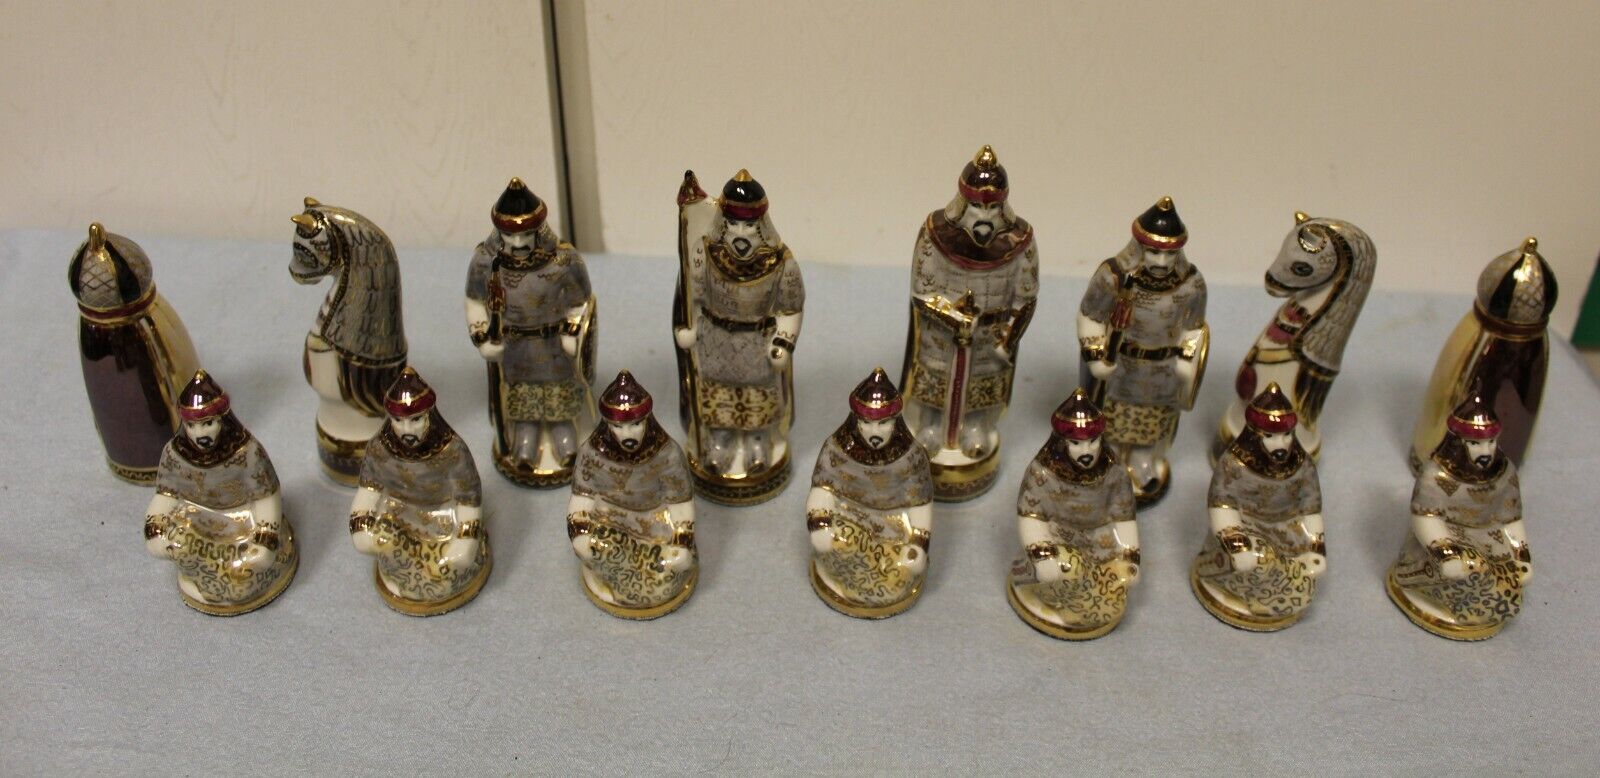 11597.Russian Porcelain Chess Pieces. Very Rare. Absent in Porcelain chess index